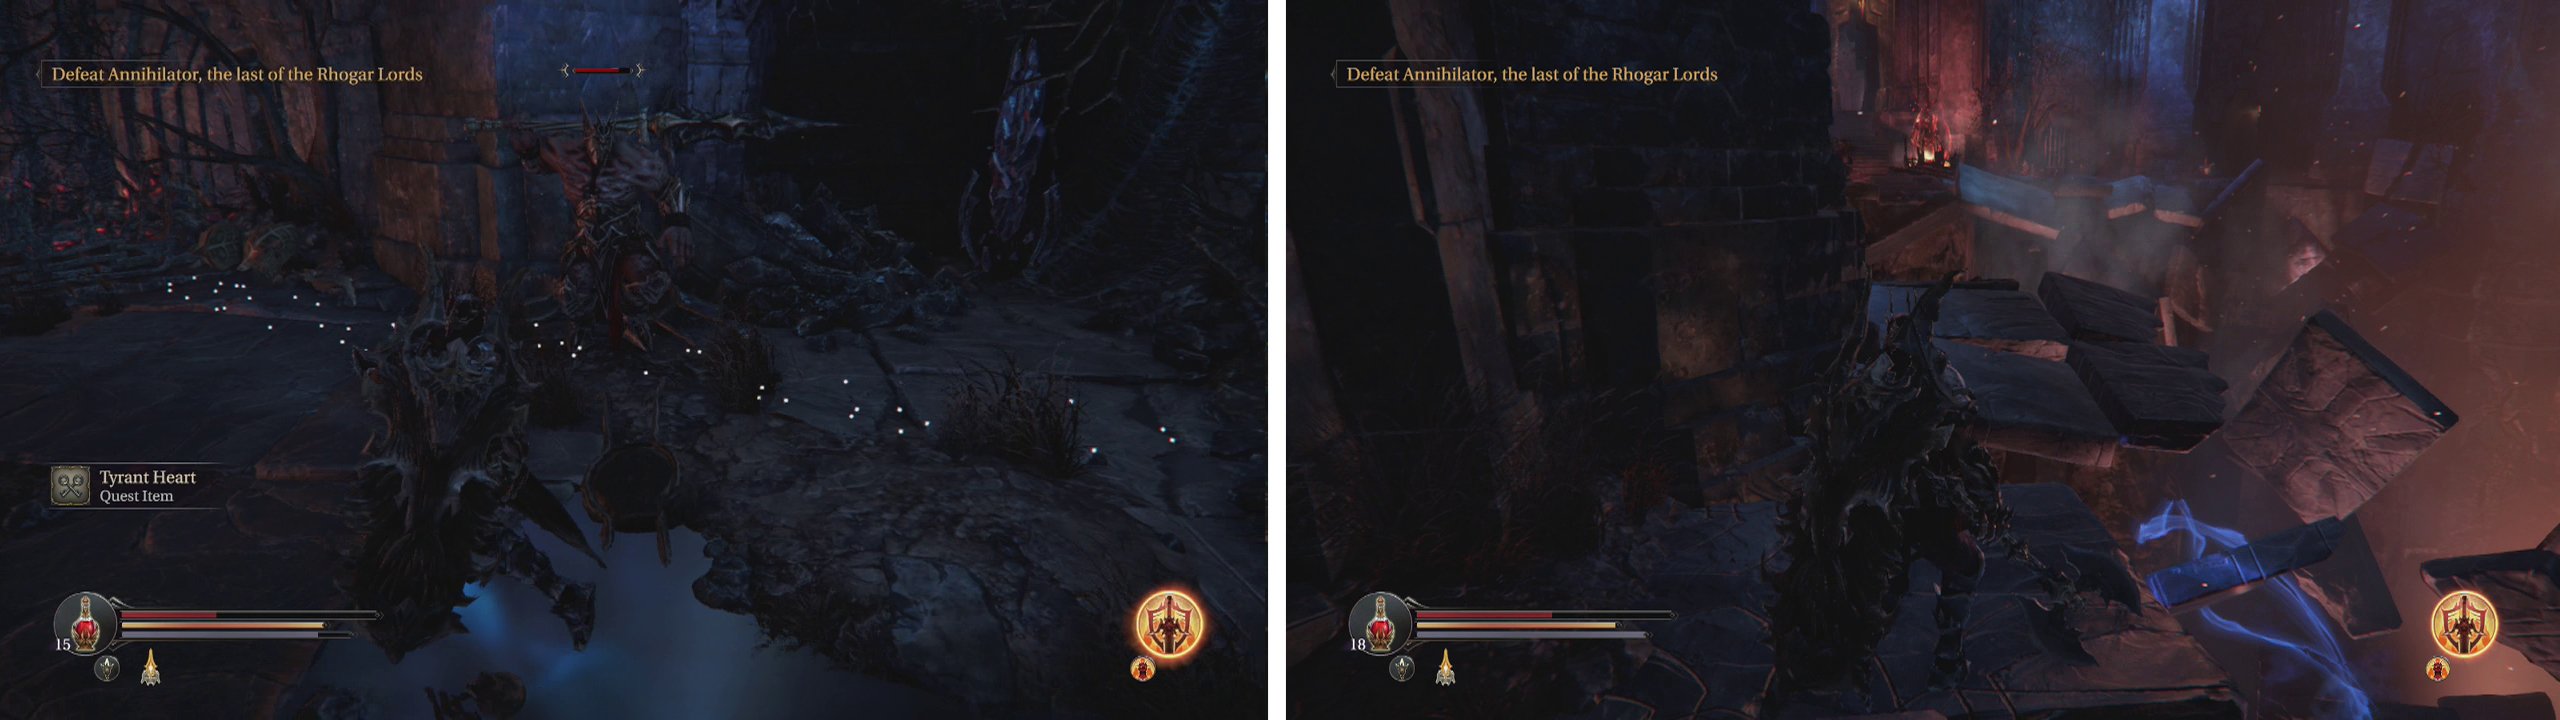 Kill the Tyrant (left) and then look for the broken ledge nearby we can use to access a chest guarded by a Fire Golem (right).